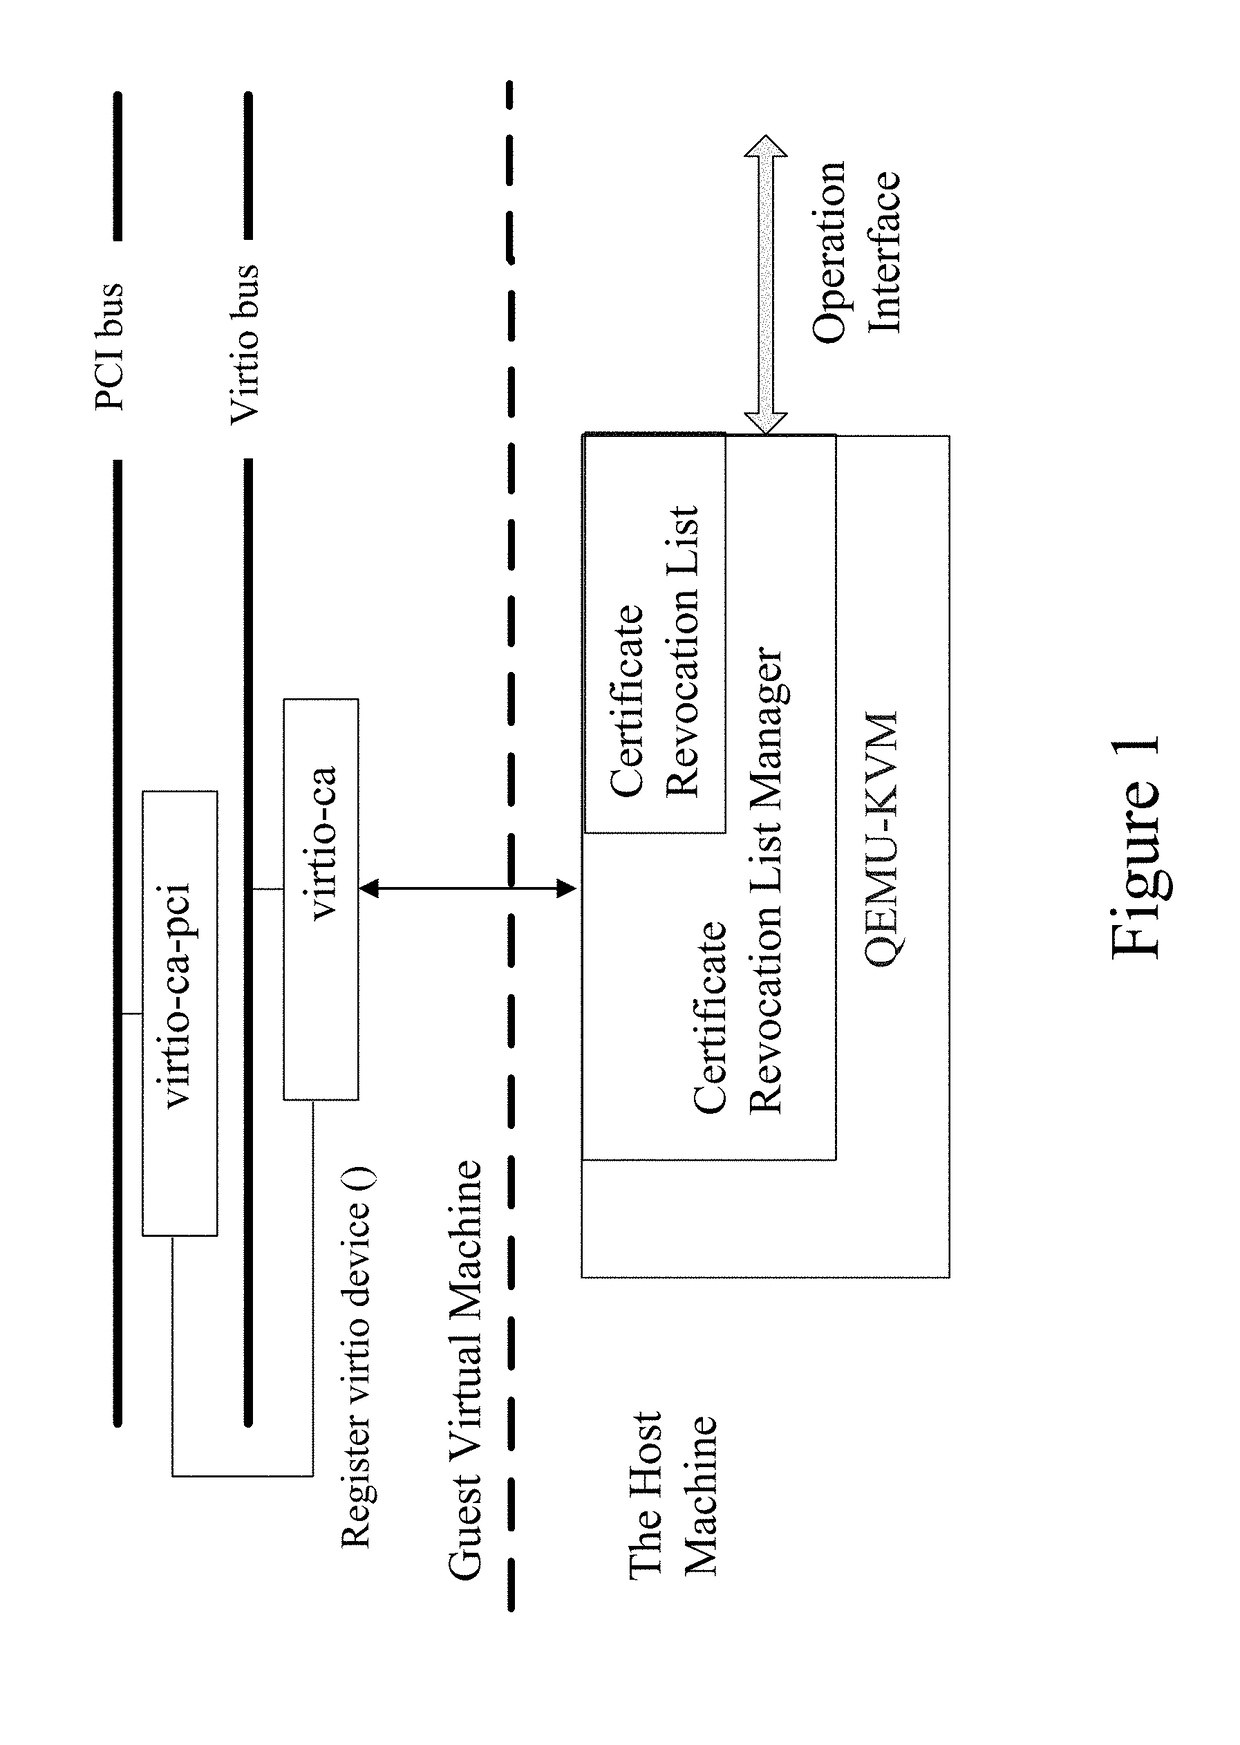 Method and system for checking revocation status of digital certificates in a virtualization environment